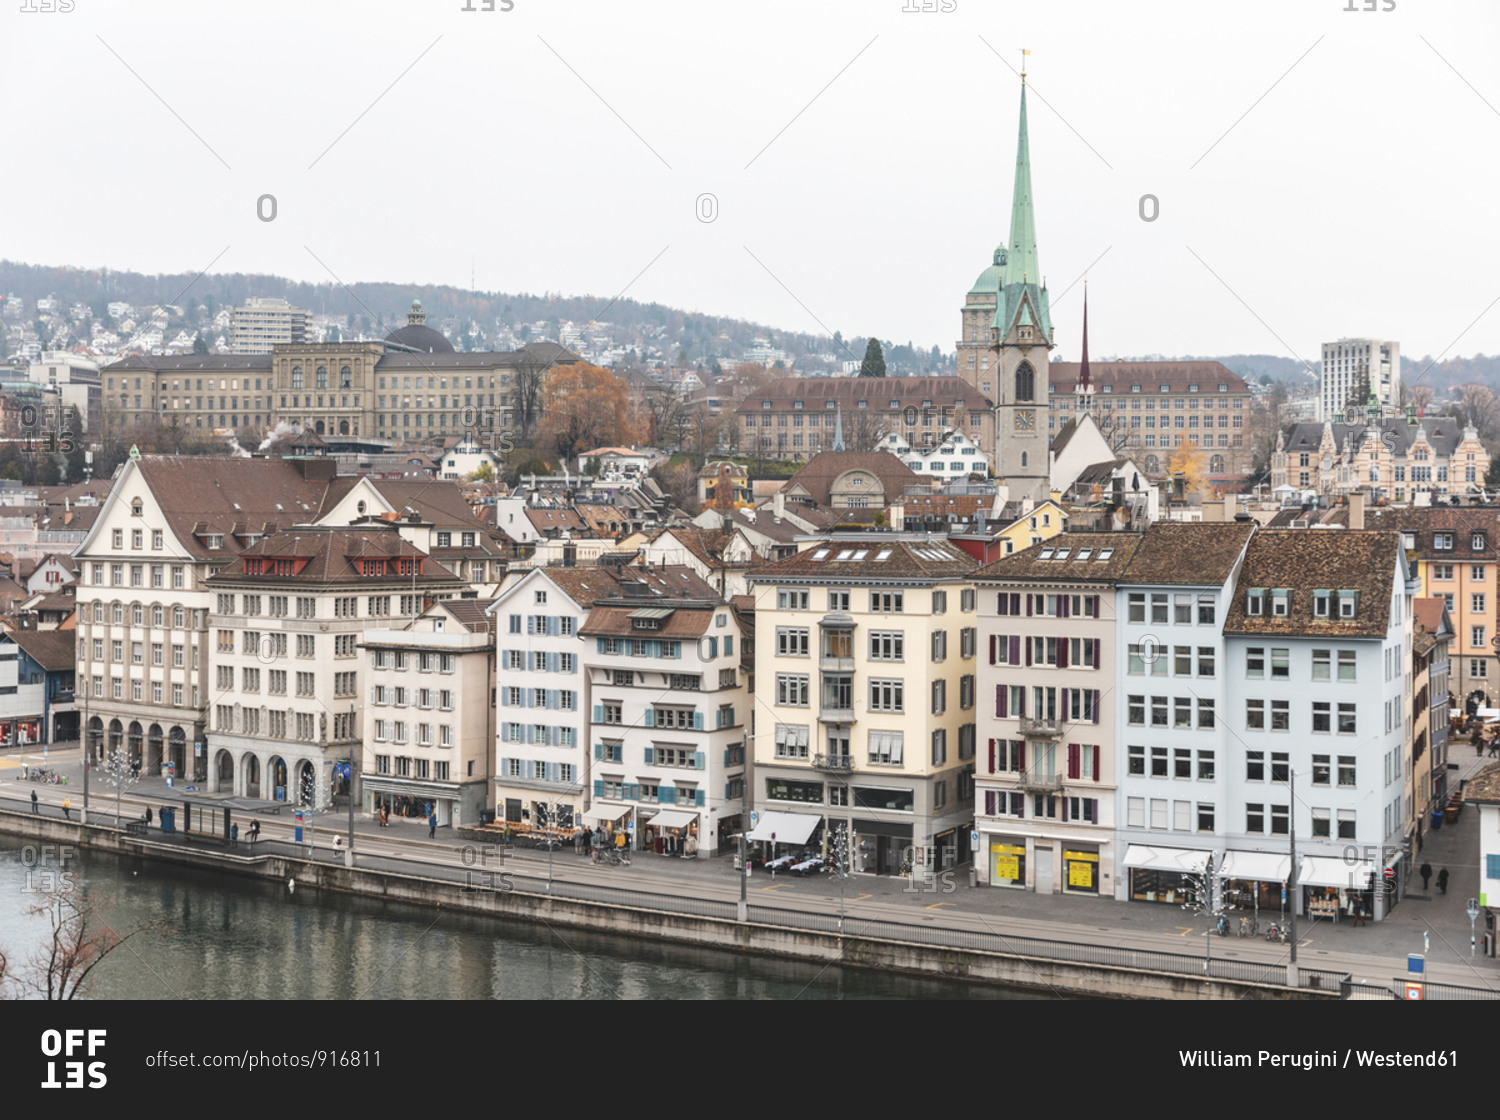 Switzerland- Zurich- Aerial view of city with Limmat river in foreground and university buildings in background